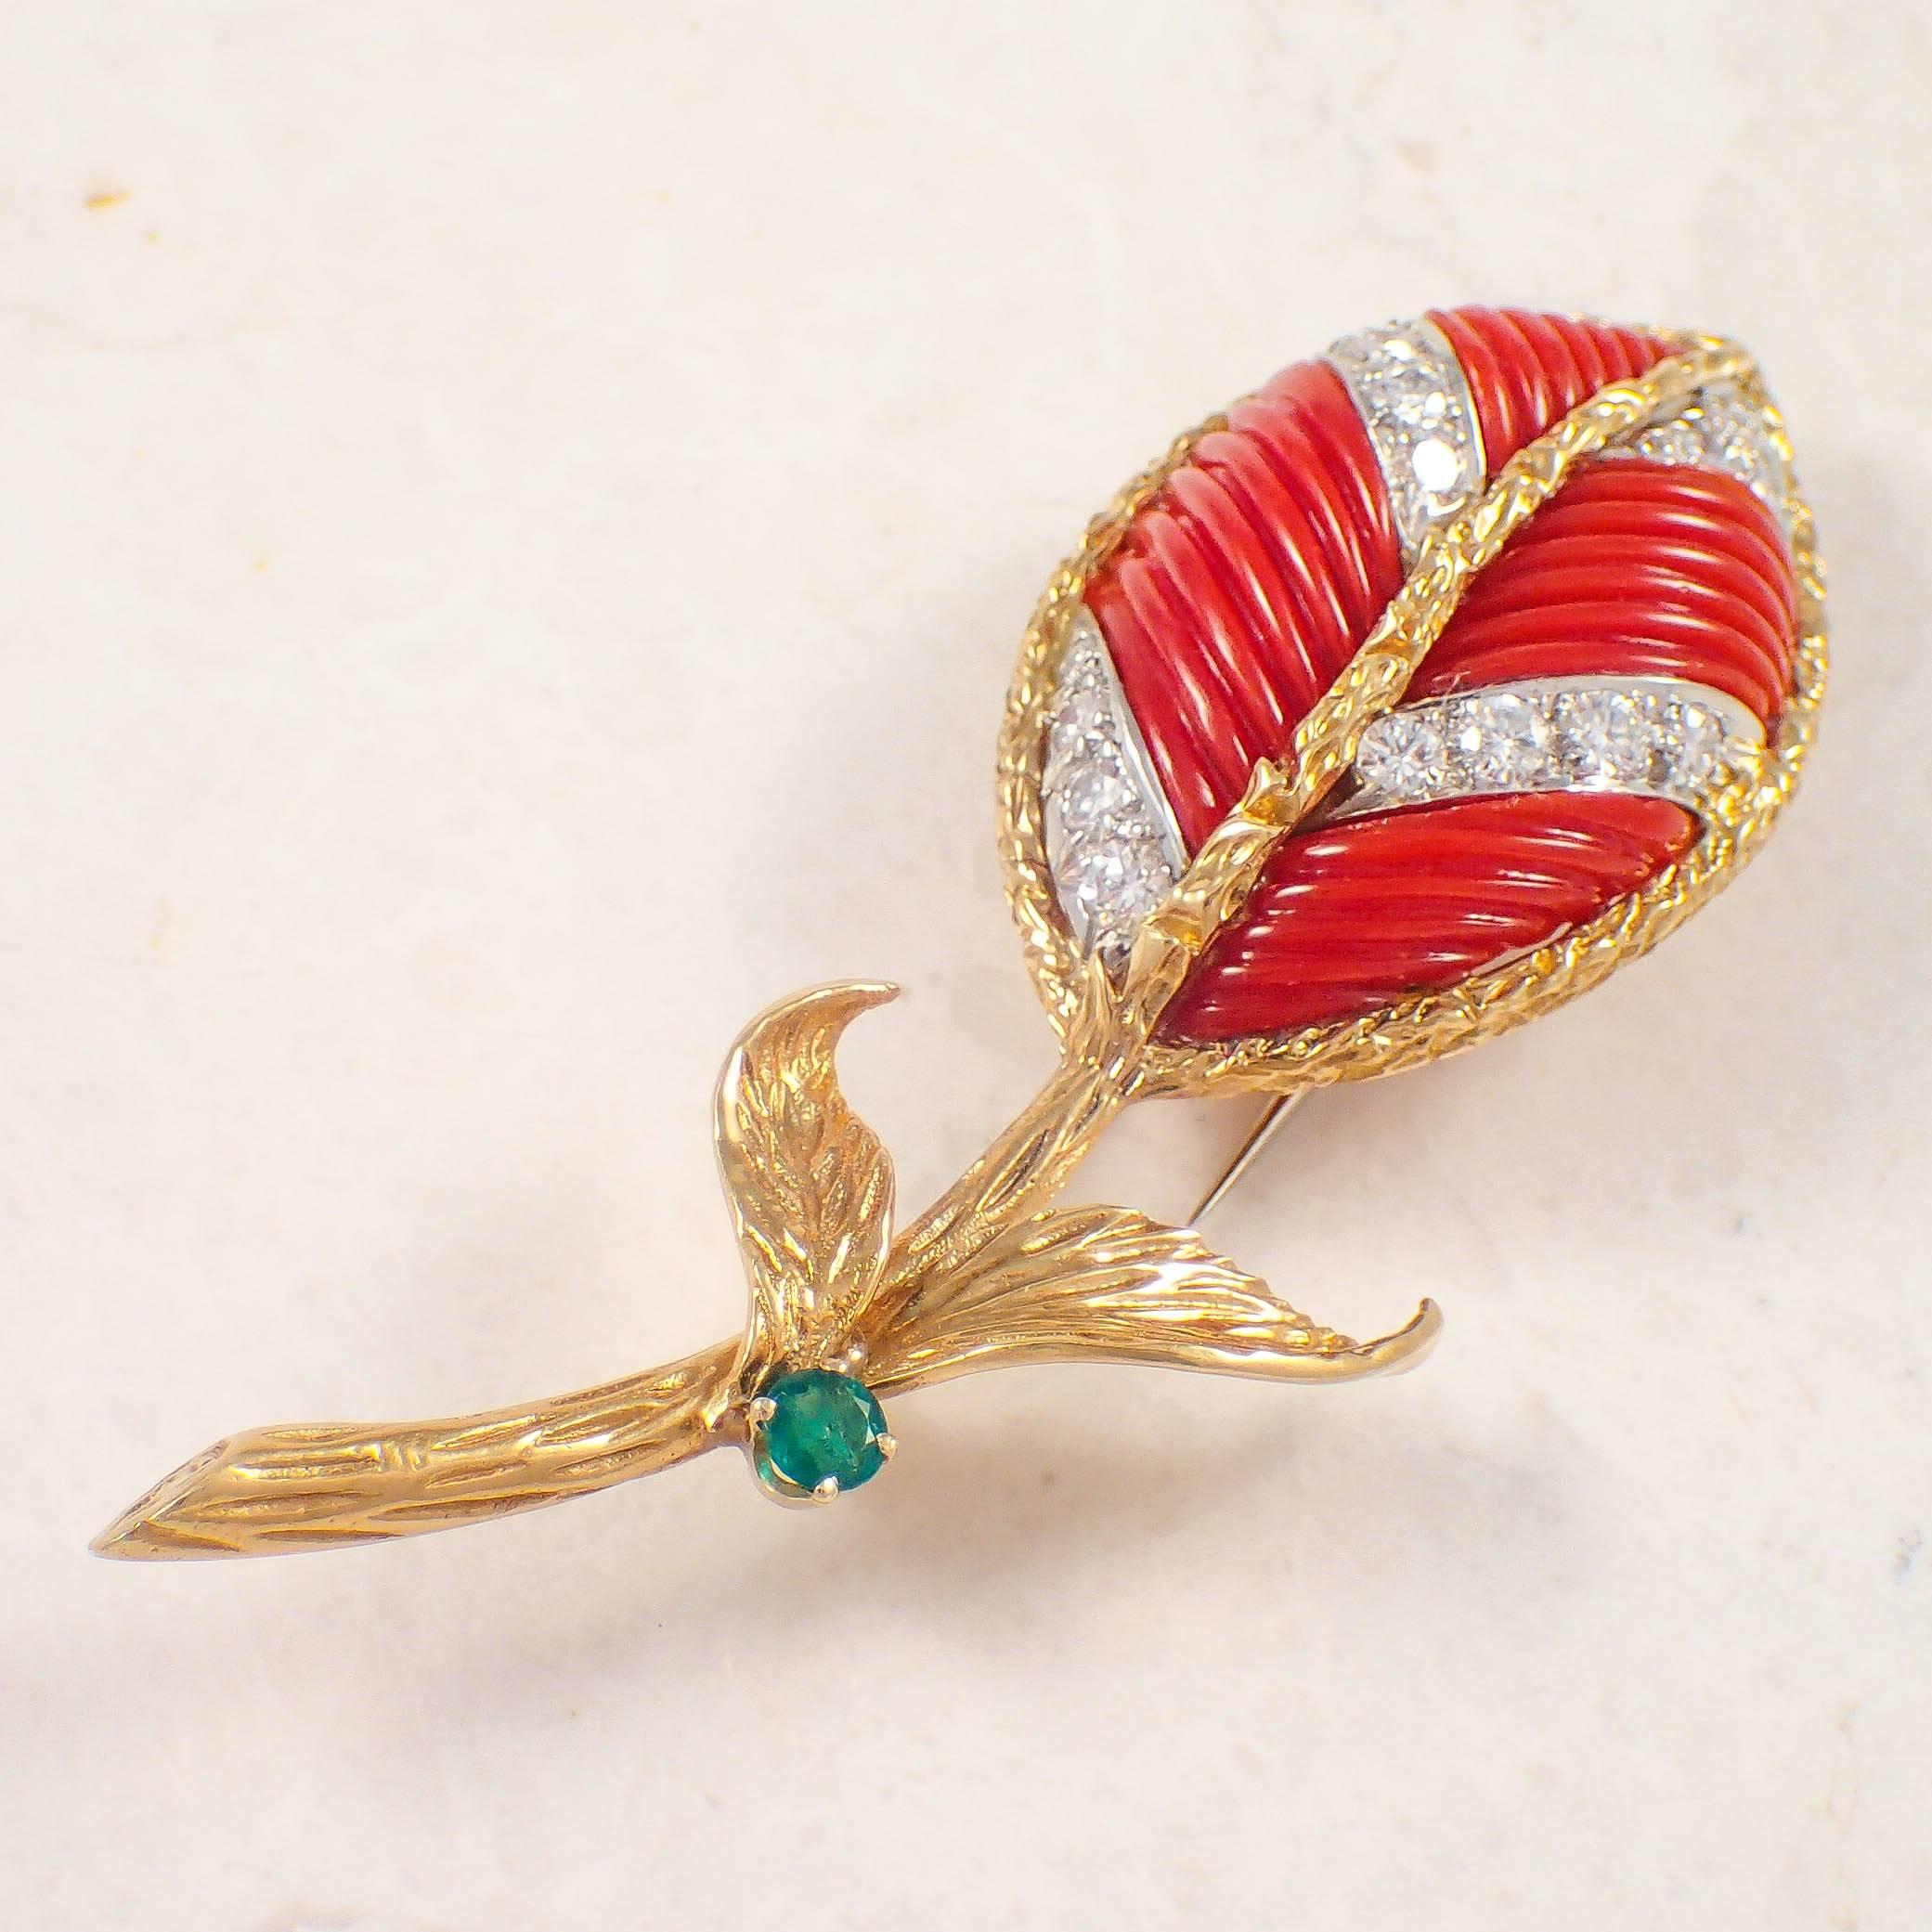 18K Yellow gold and platinum coral, diamond and emerald brooch. The carved oxblood coral leaf brooch is pave set with 16 diamonds weighing approximately 1.00 carat total and one round emerald measuring 3.5 mm. The brooch measures 3 X 1 inches and